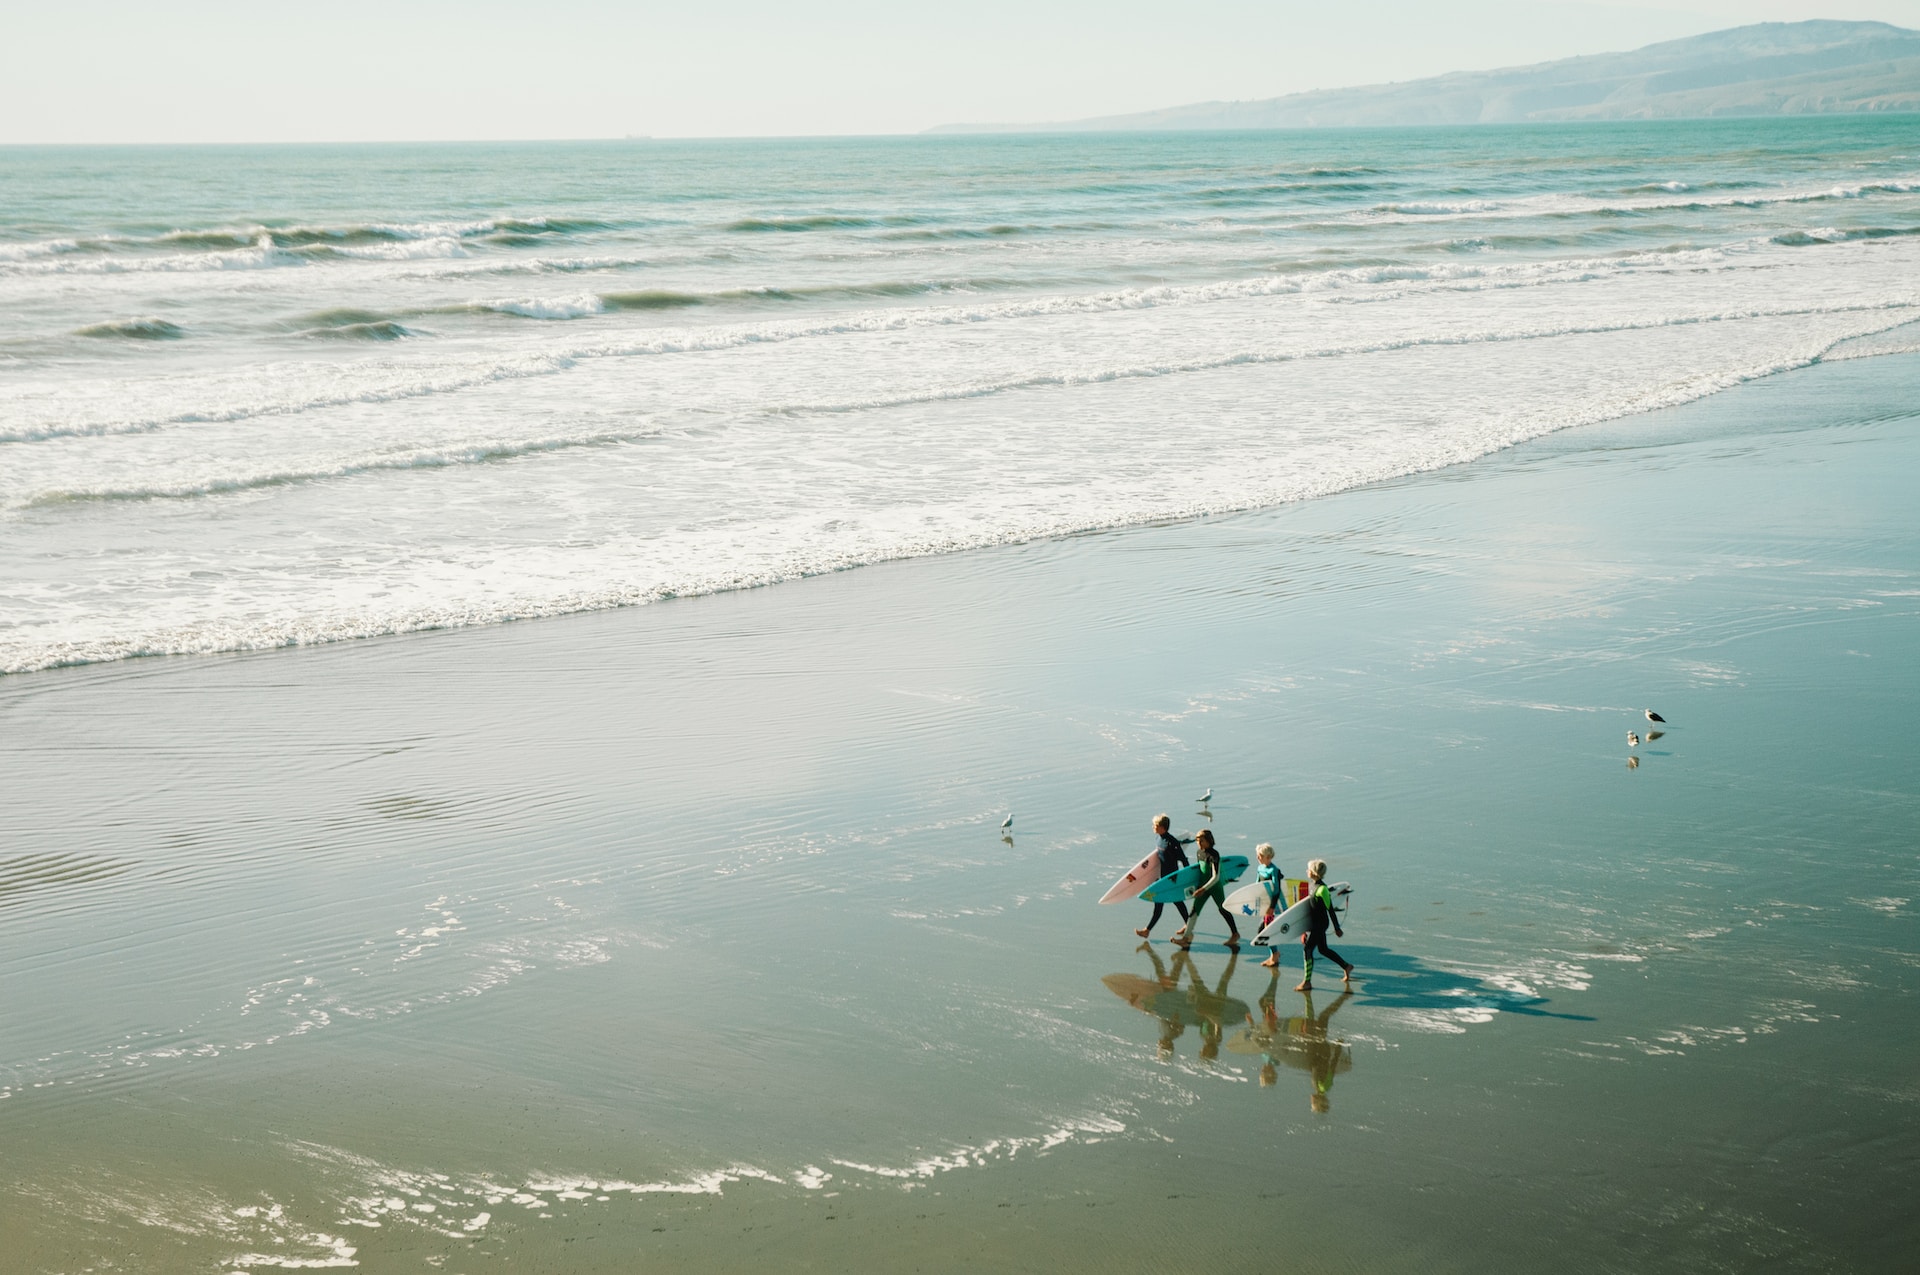 Surfing at New Brighton, Christchurch. Photo: Delphine Ducaruge